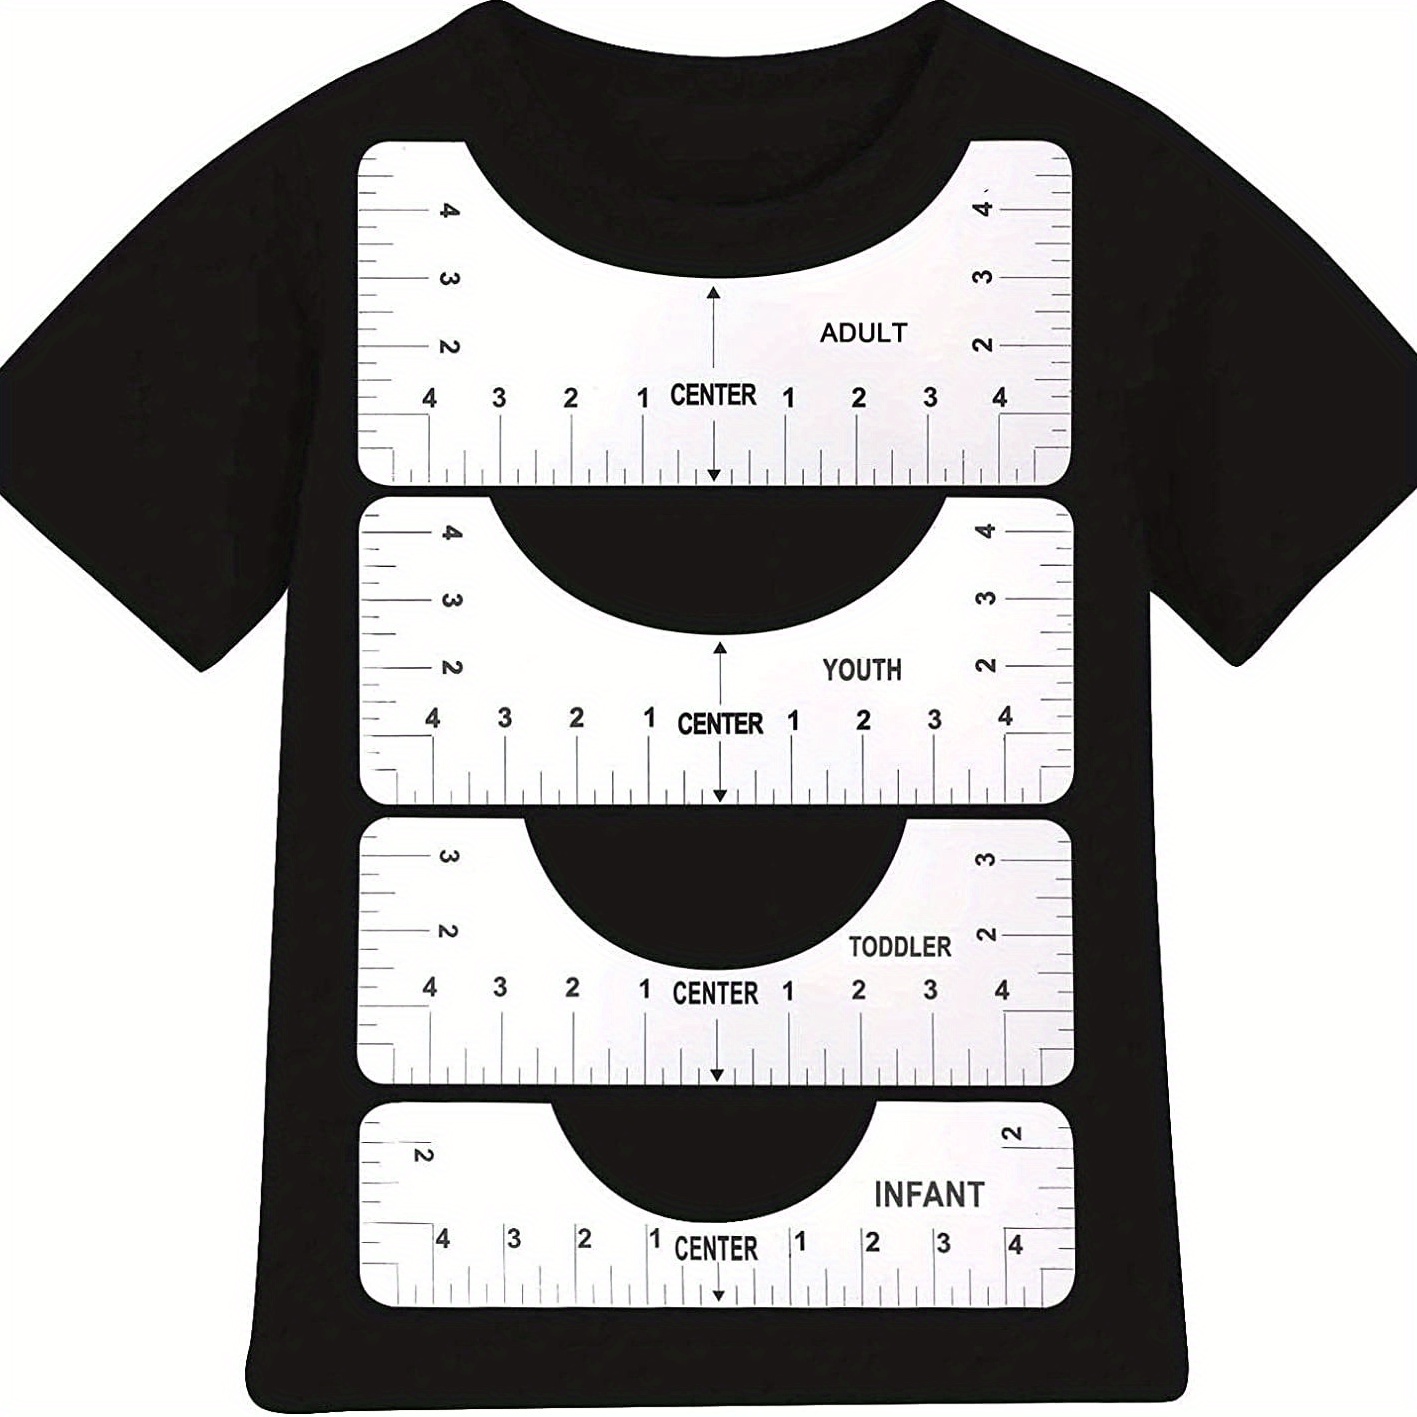 Tshirt Ruler Guide For Vinyl Alignment, T Shirt Rulers To Center Designs,  Alignment Tool With Soft Tape Measure, Craft Sewing Supplies Accessories Too